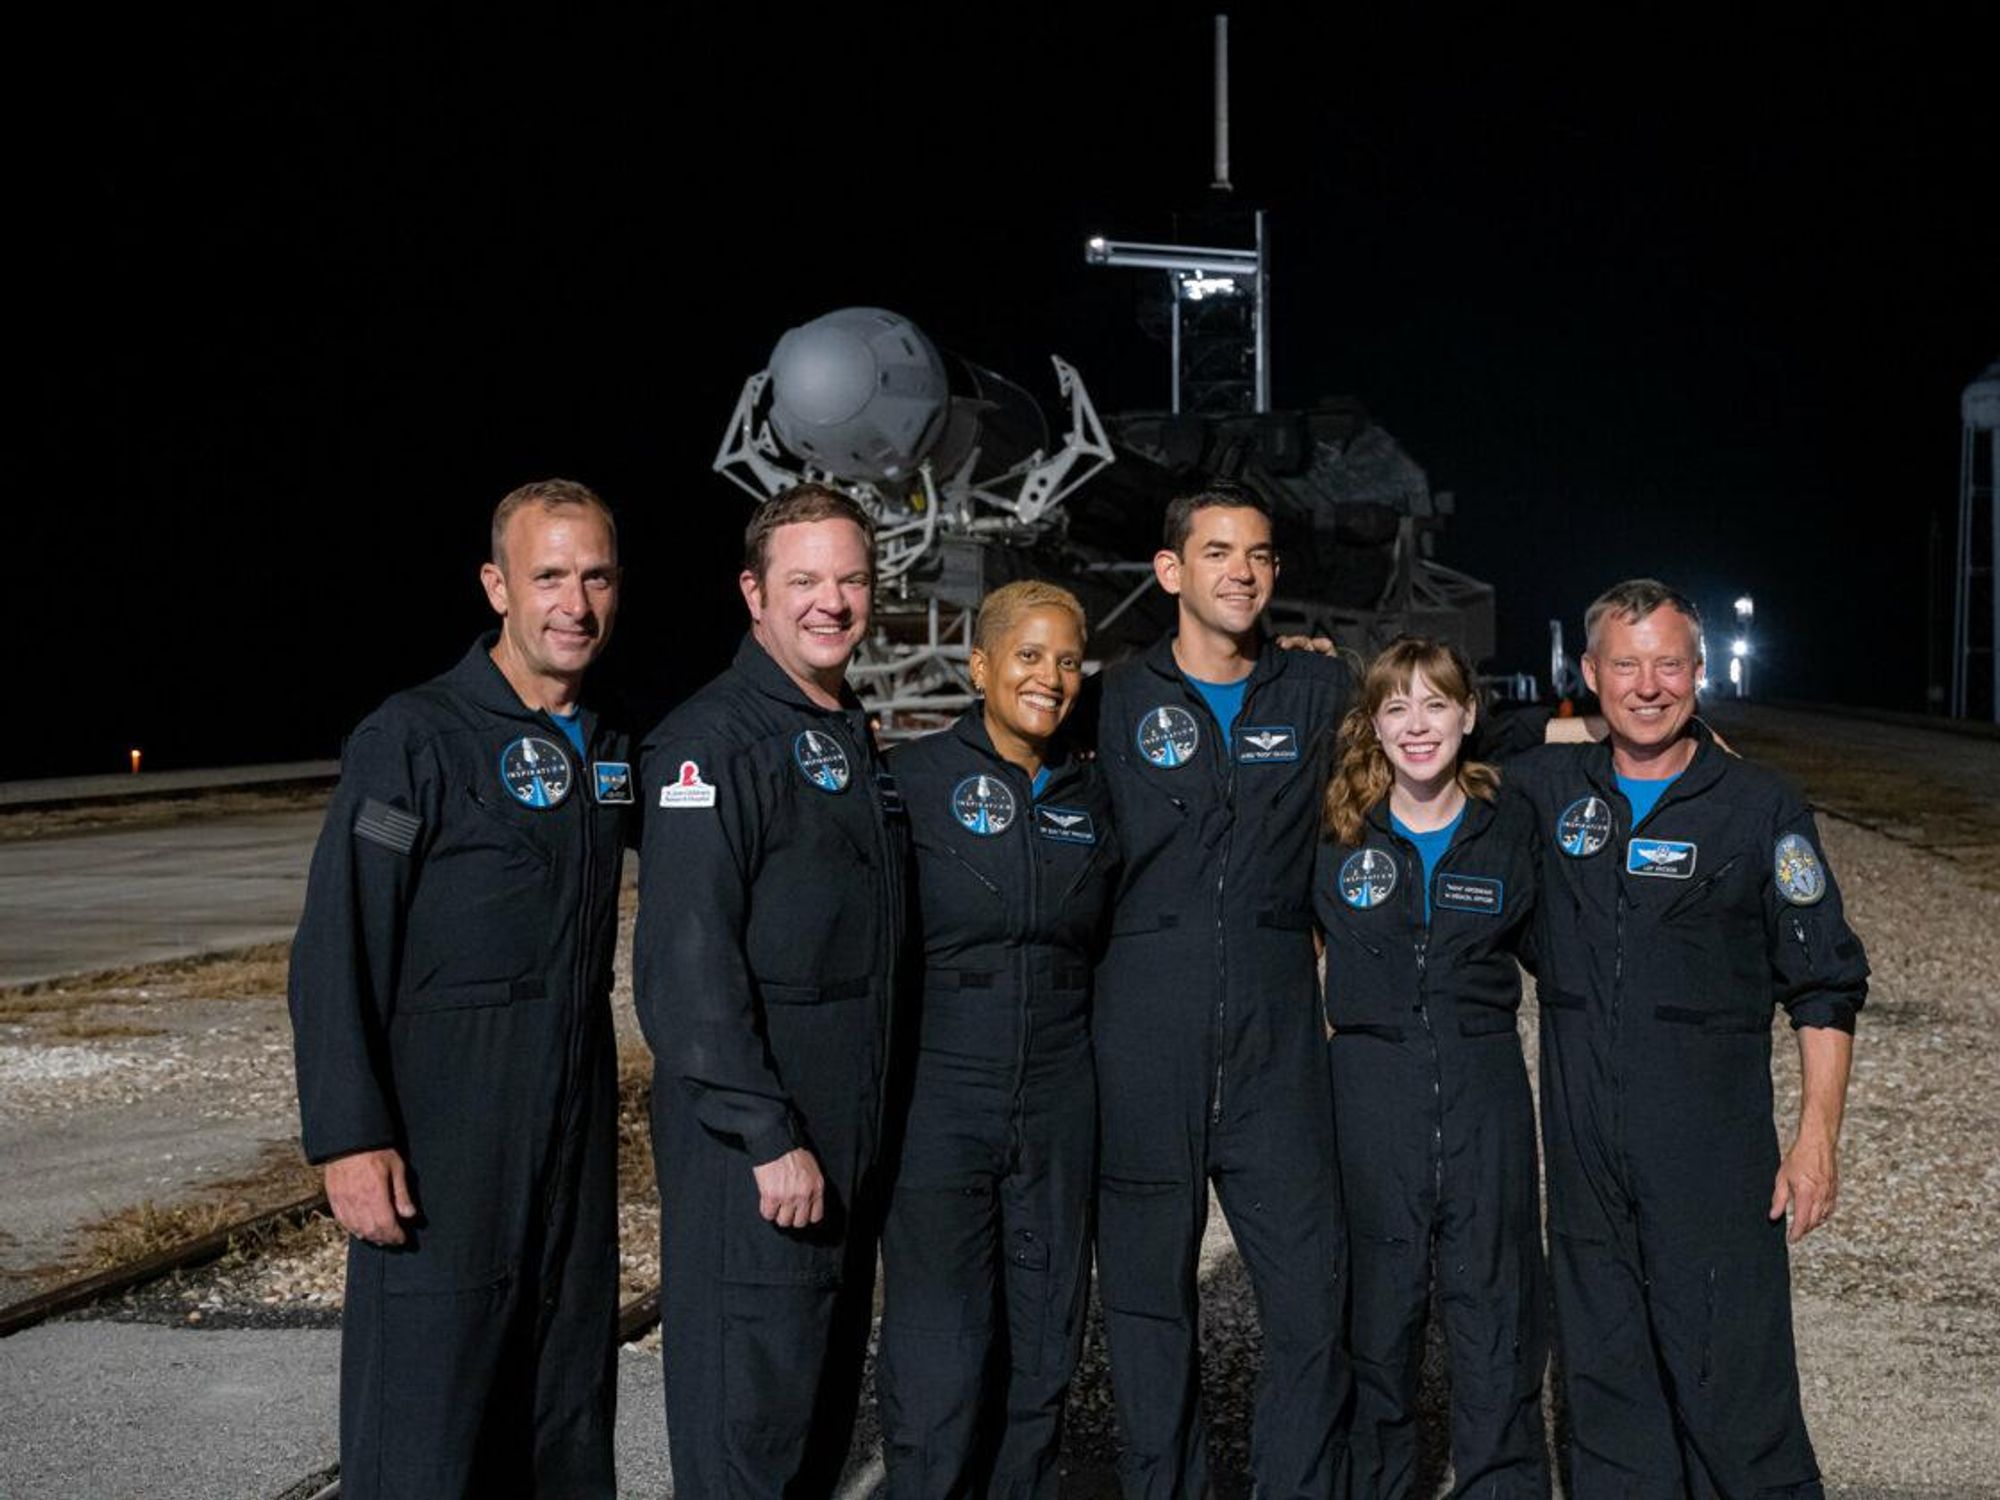 SpaceX's 'All-Civilian' Crew Represents the Dawn of a Second Space Age